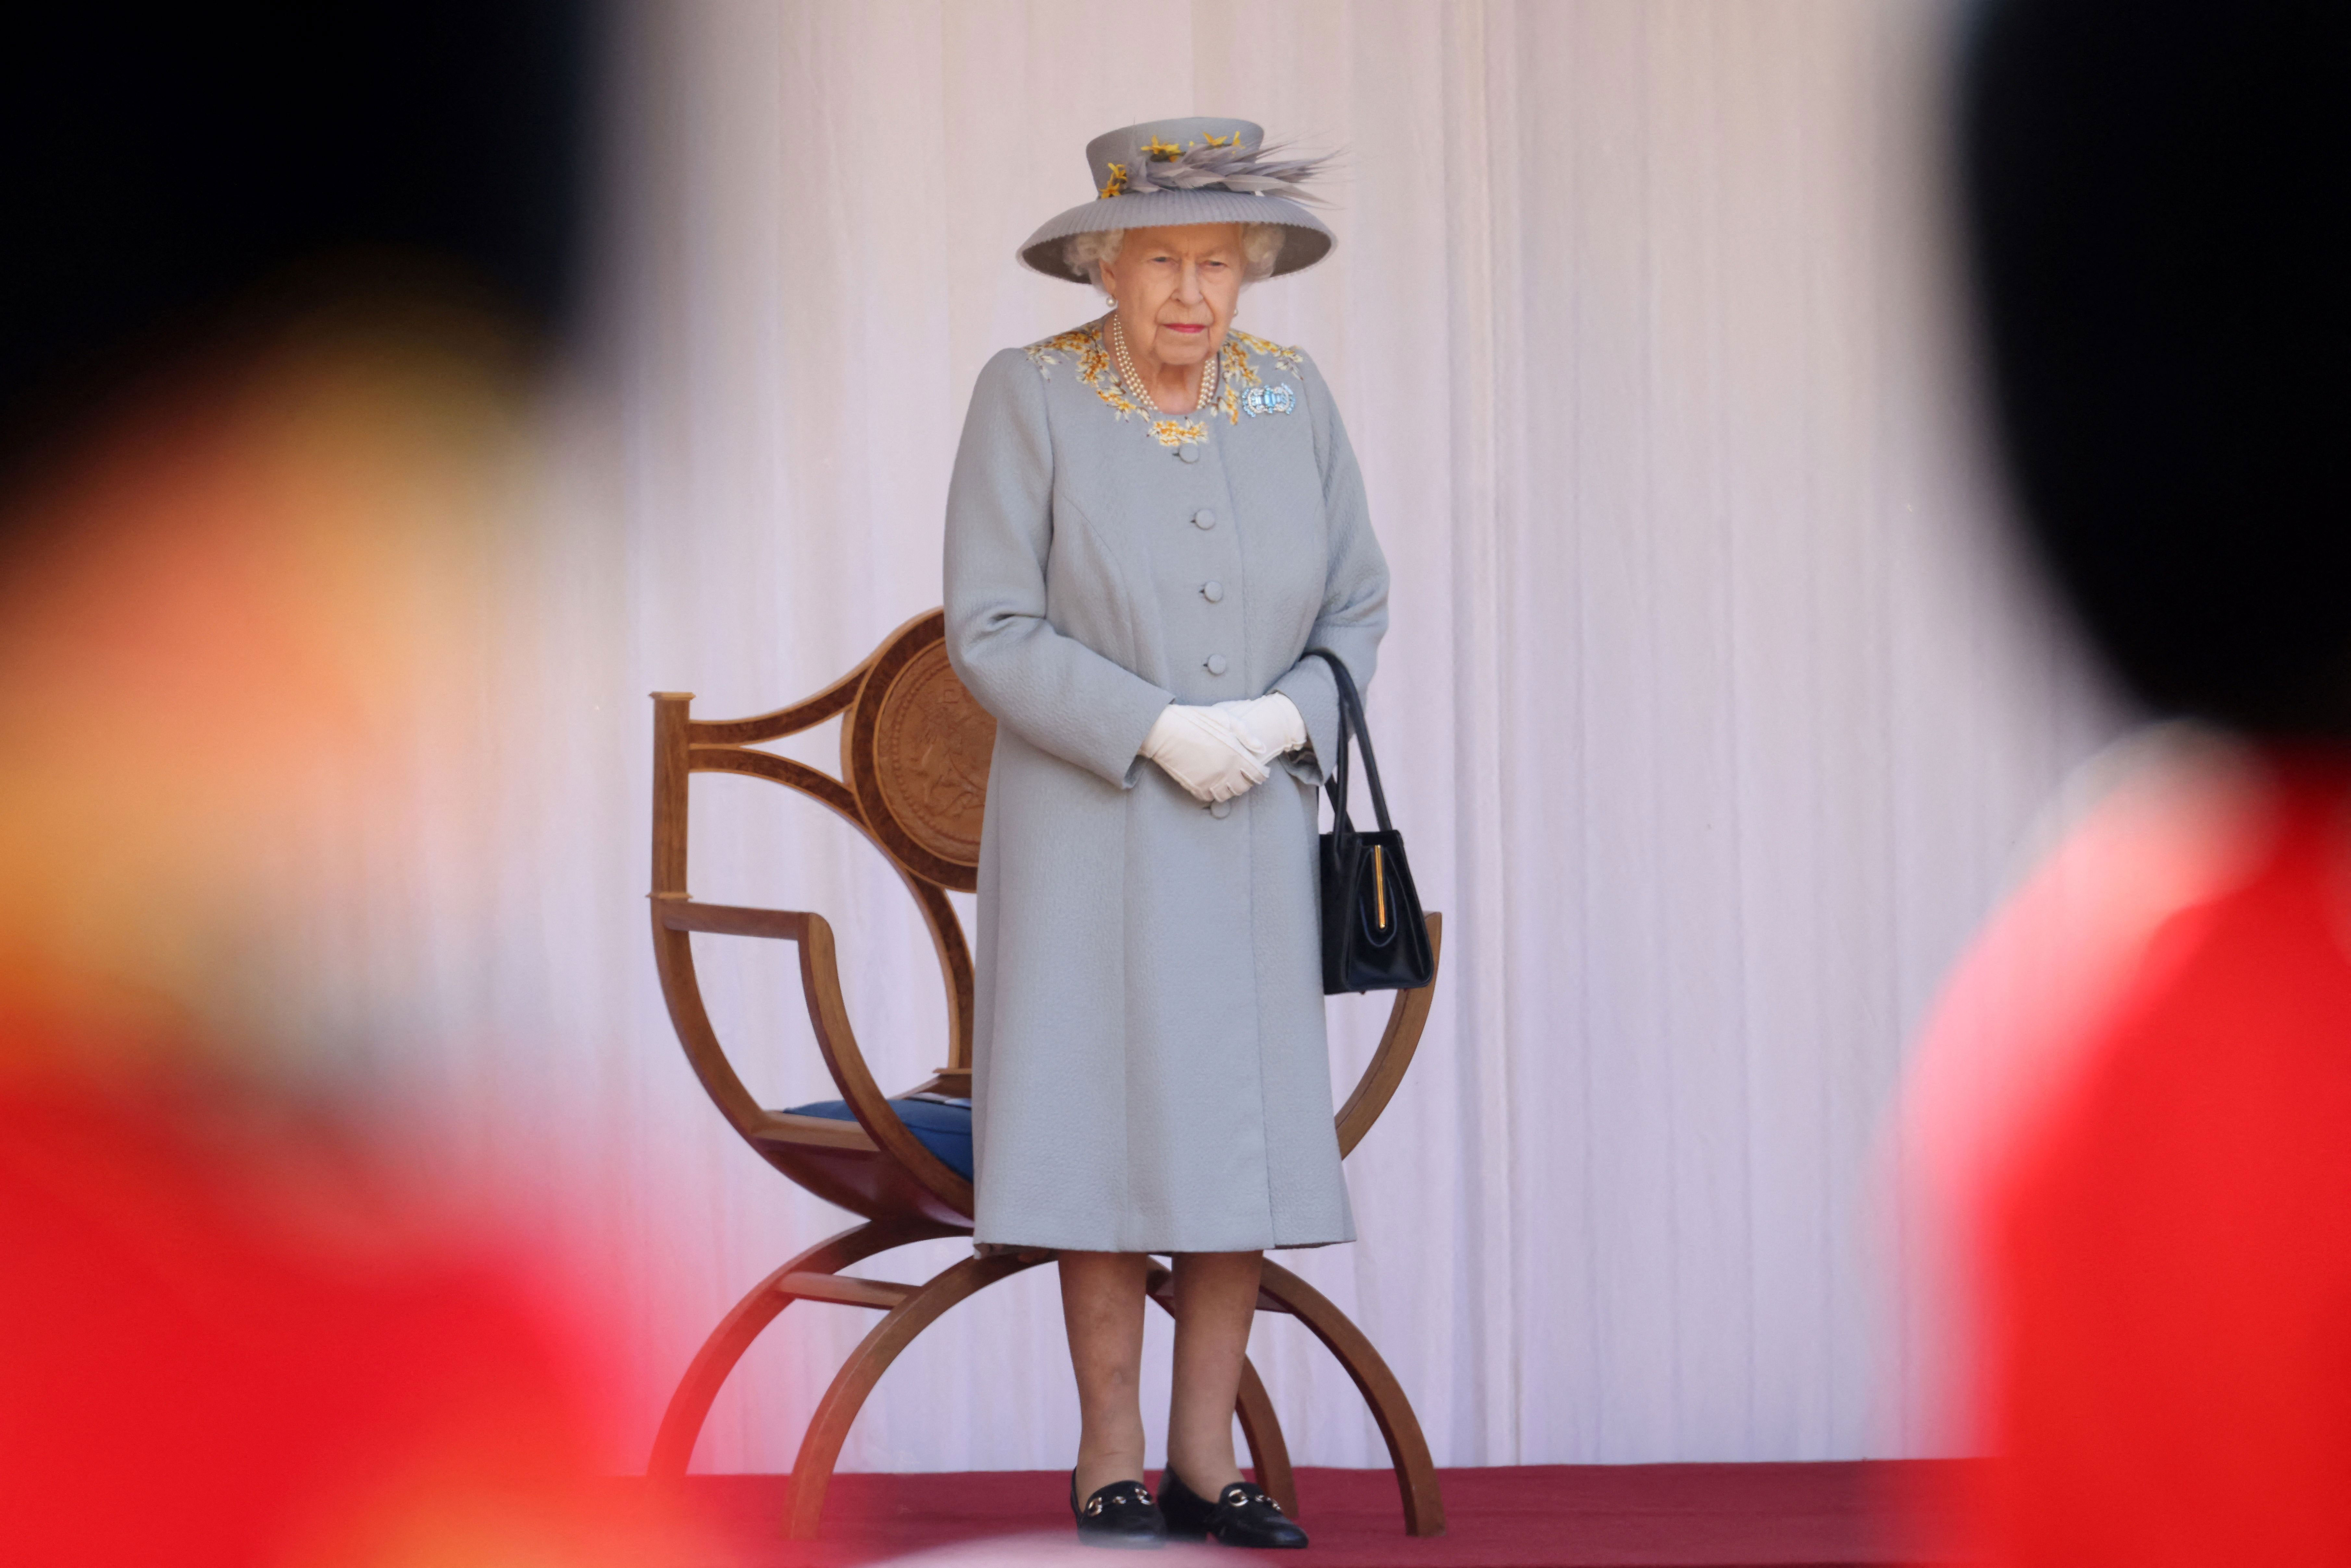 Queen Elizabeth II watches a military ceremony at Windsor Castle in England on June 12.